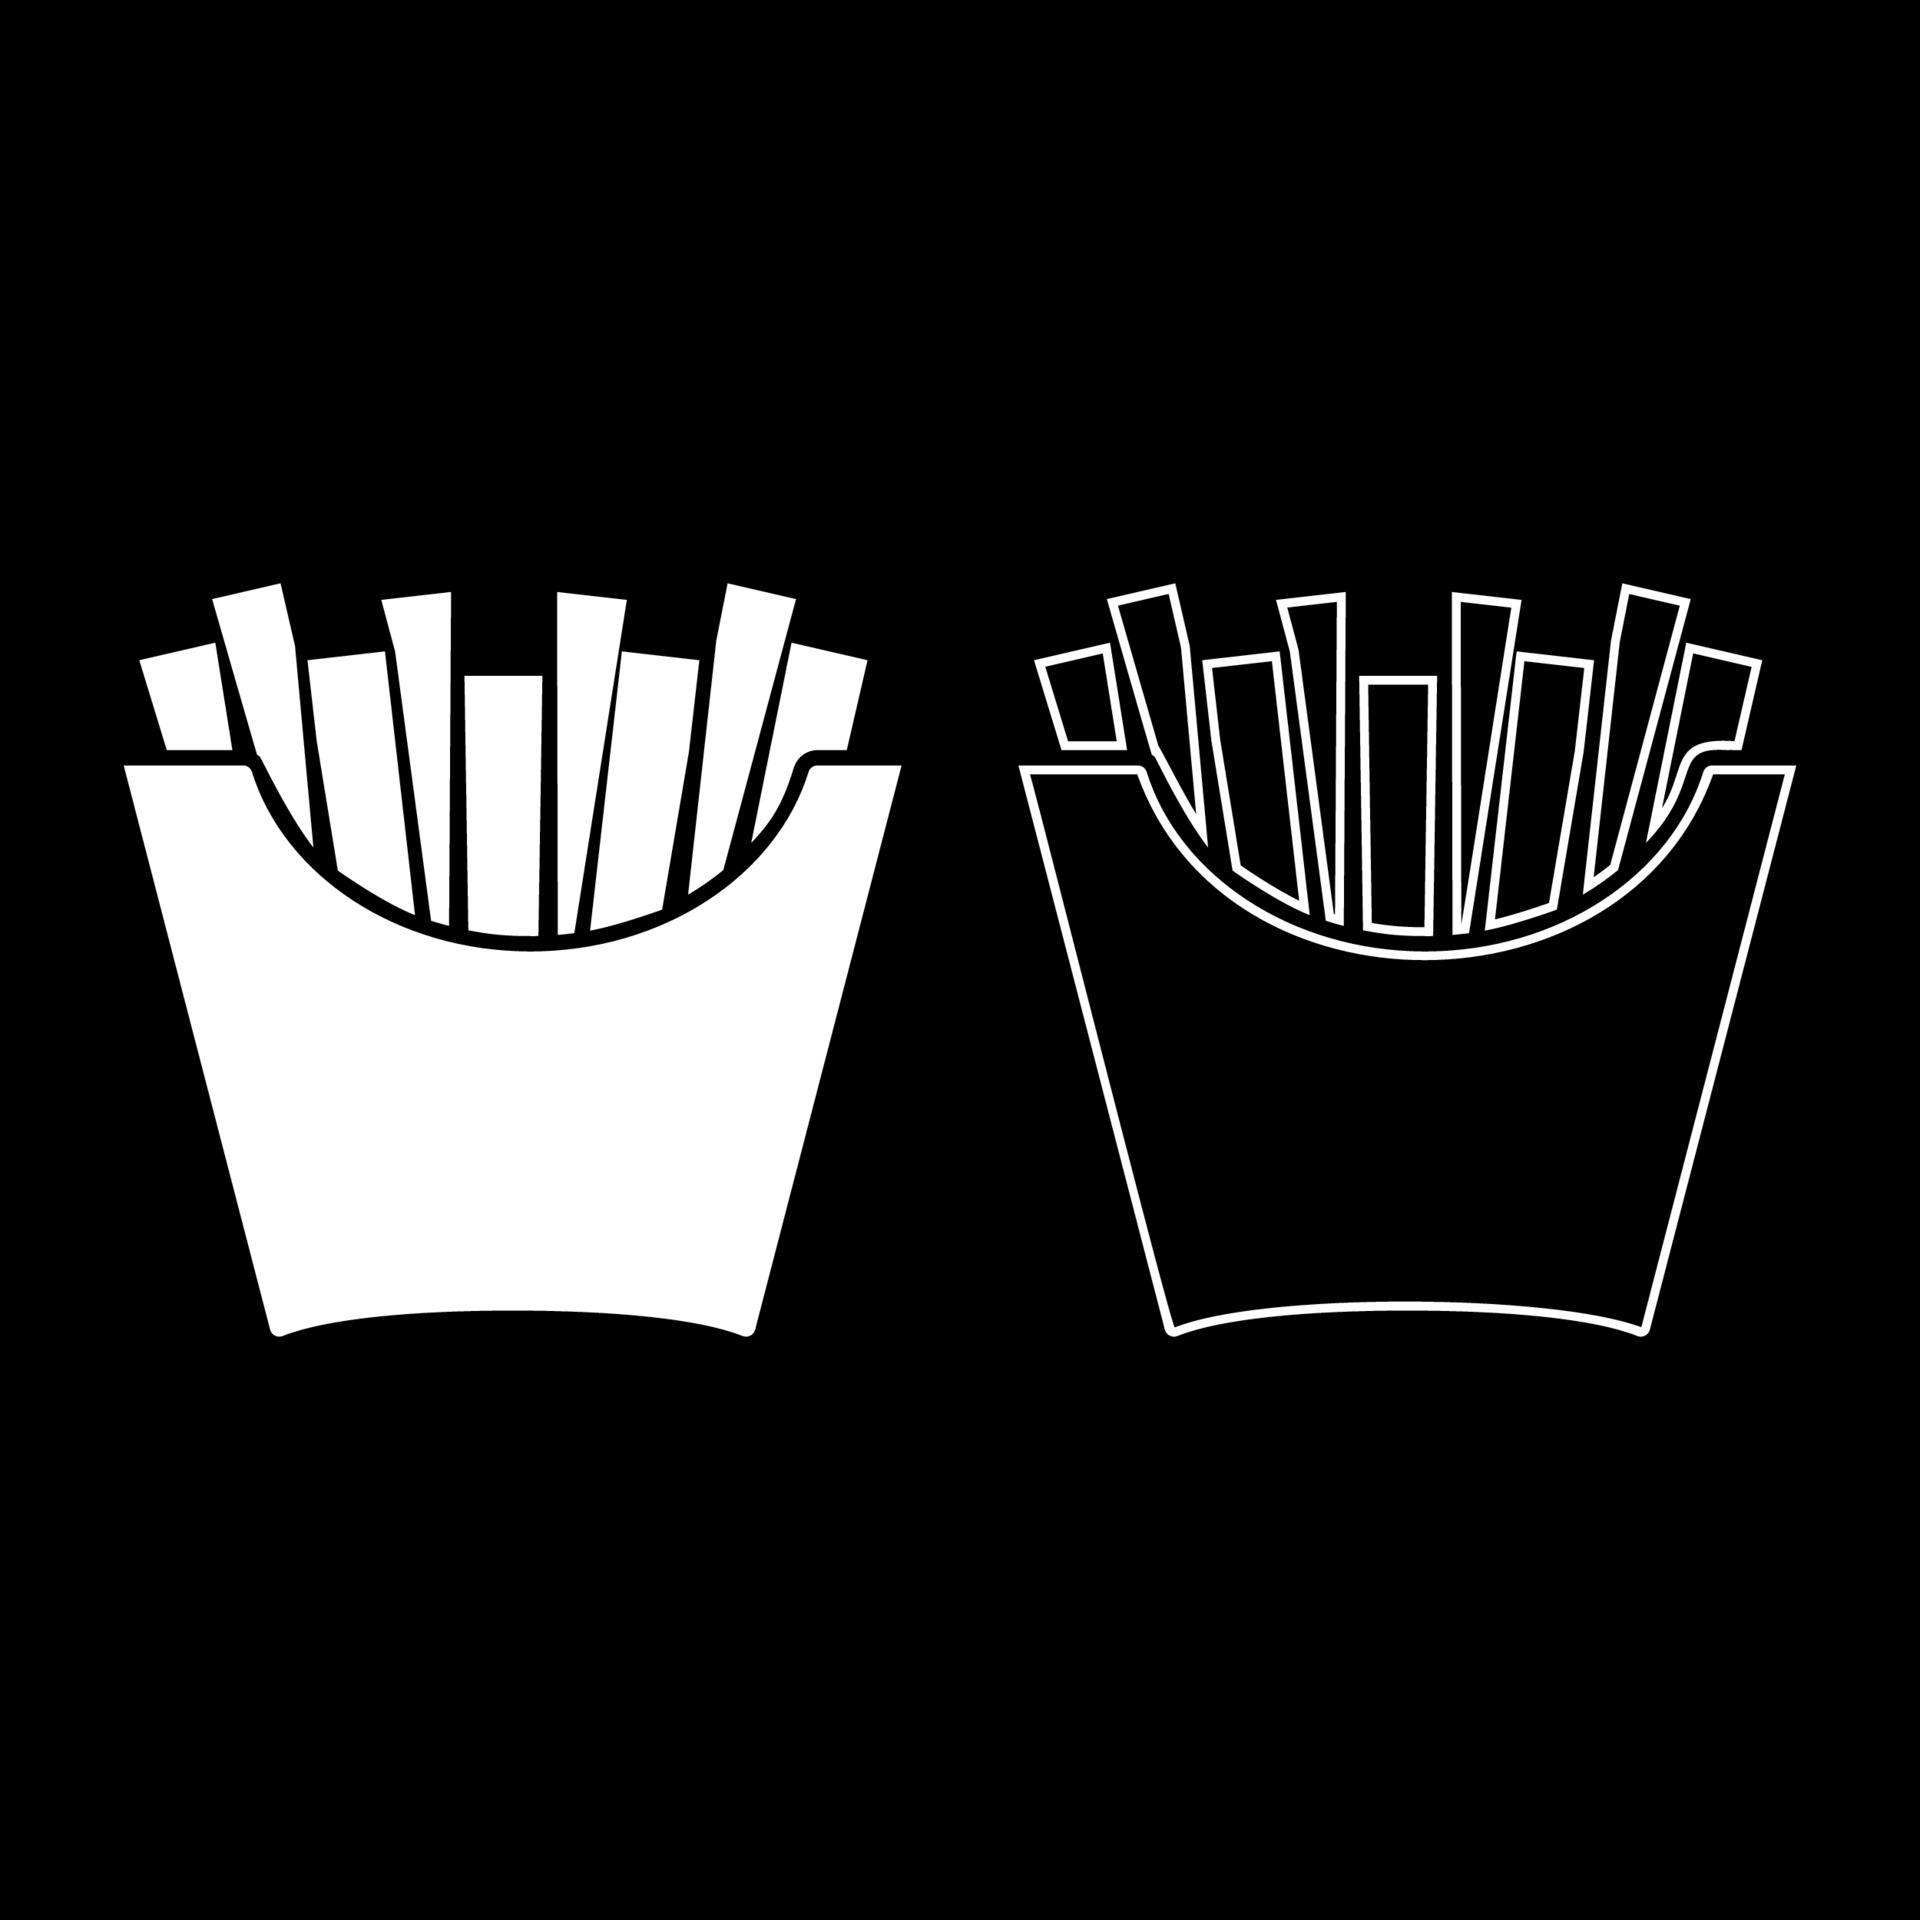 French Fries Potatoes Vector. Fast Food Icons Potato. Full Paper